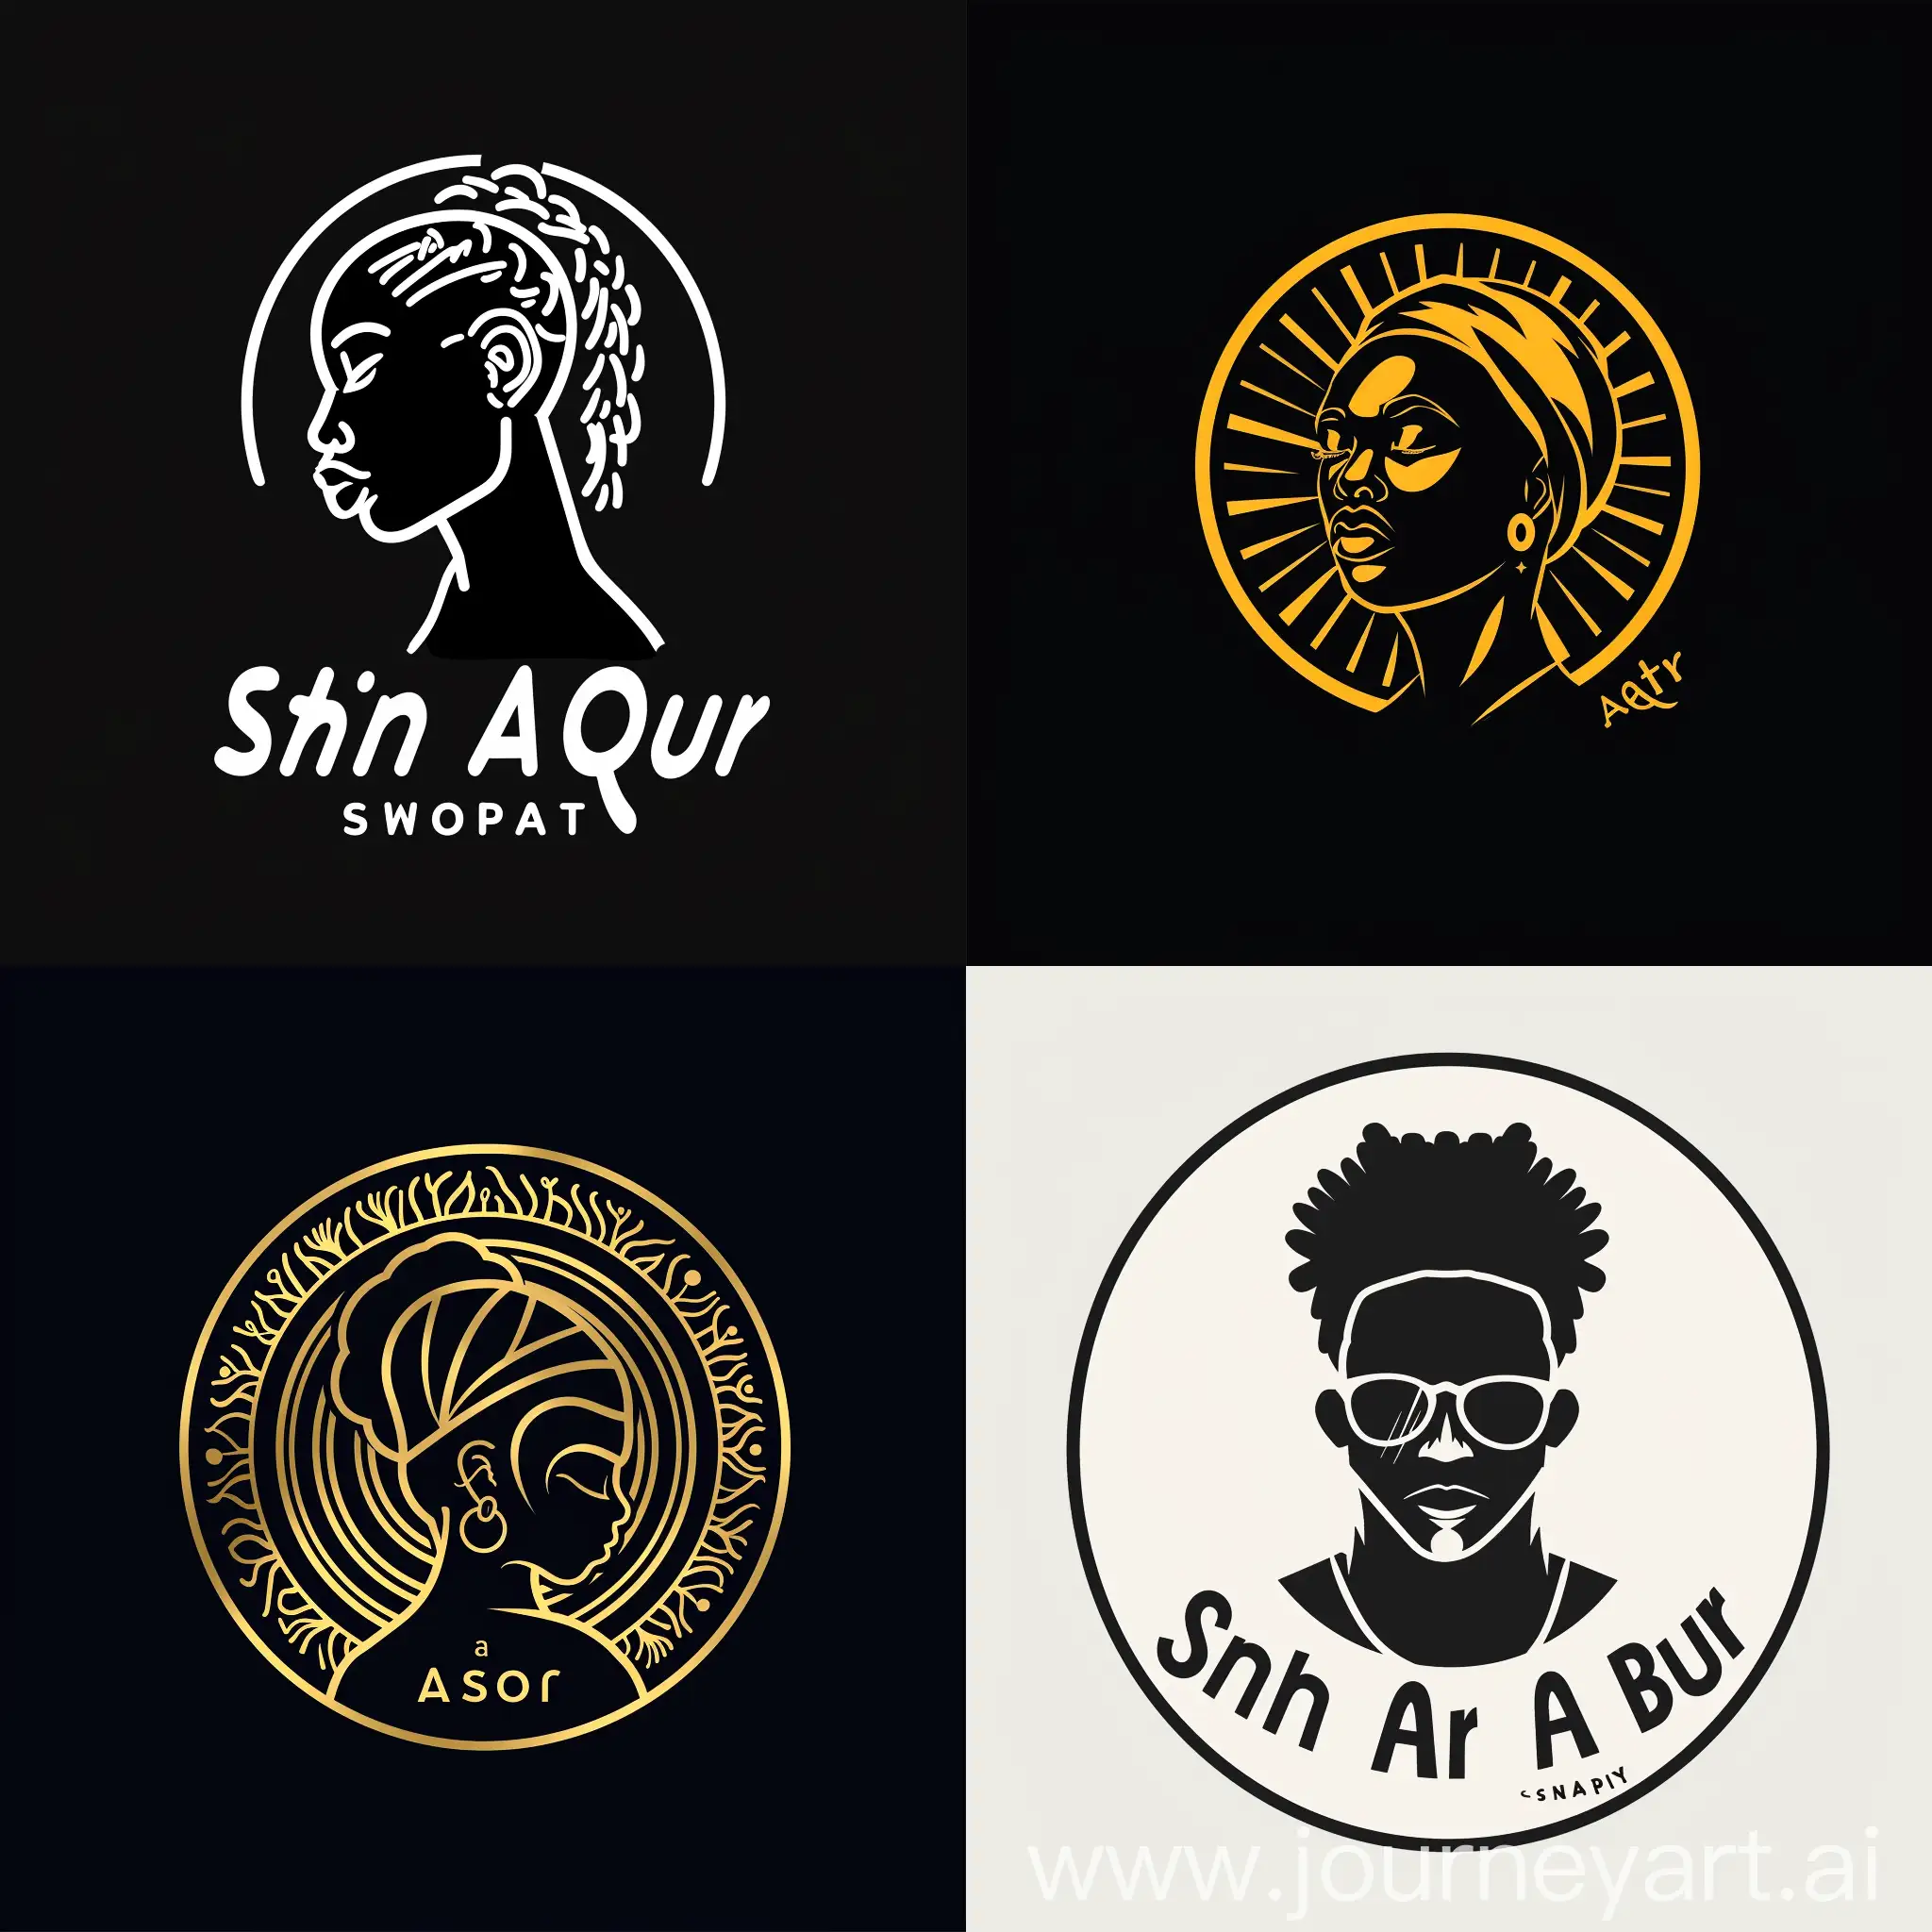 Saint Afro logo, an african caribbean shop for goods and services